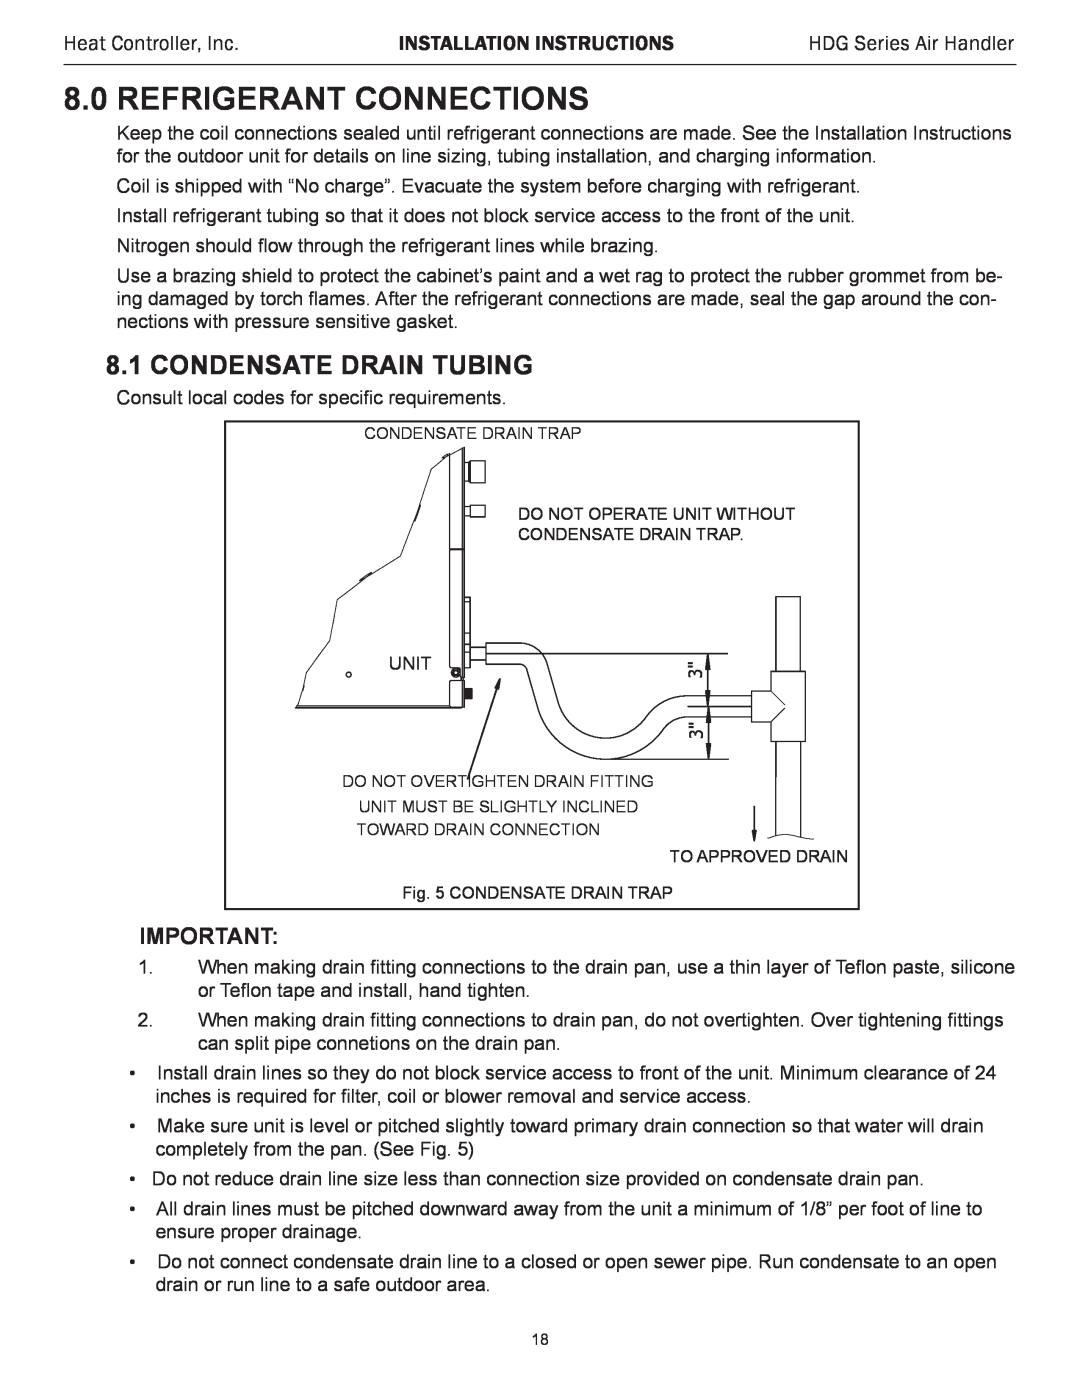 Heat Controller HDG36 Refrigerant Connections, Condensate Drain Tubing, Heat Controller, Inc, Installation Instructions 